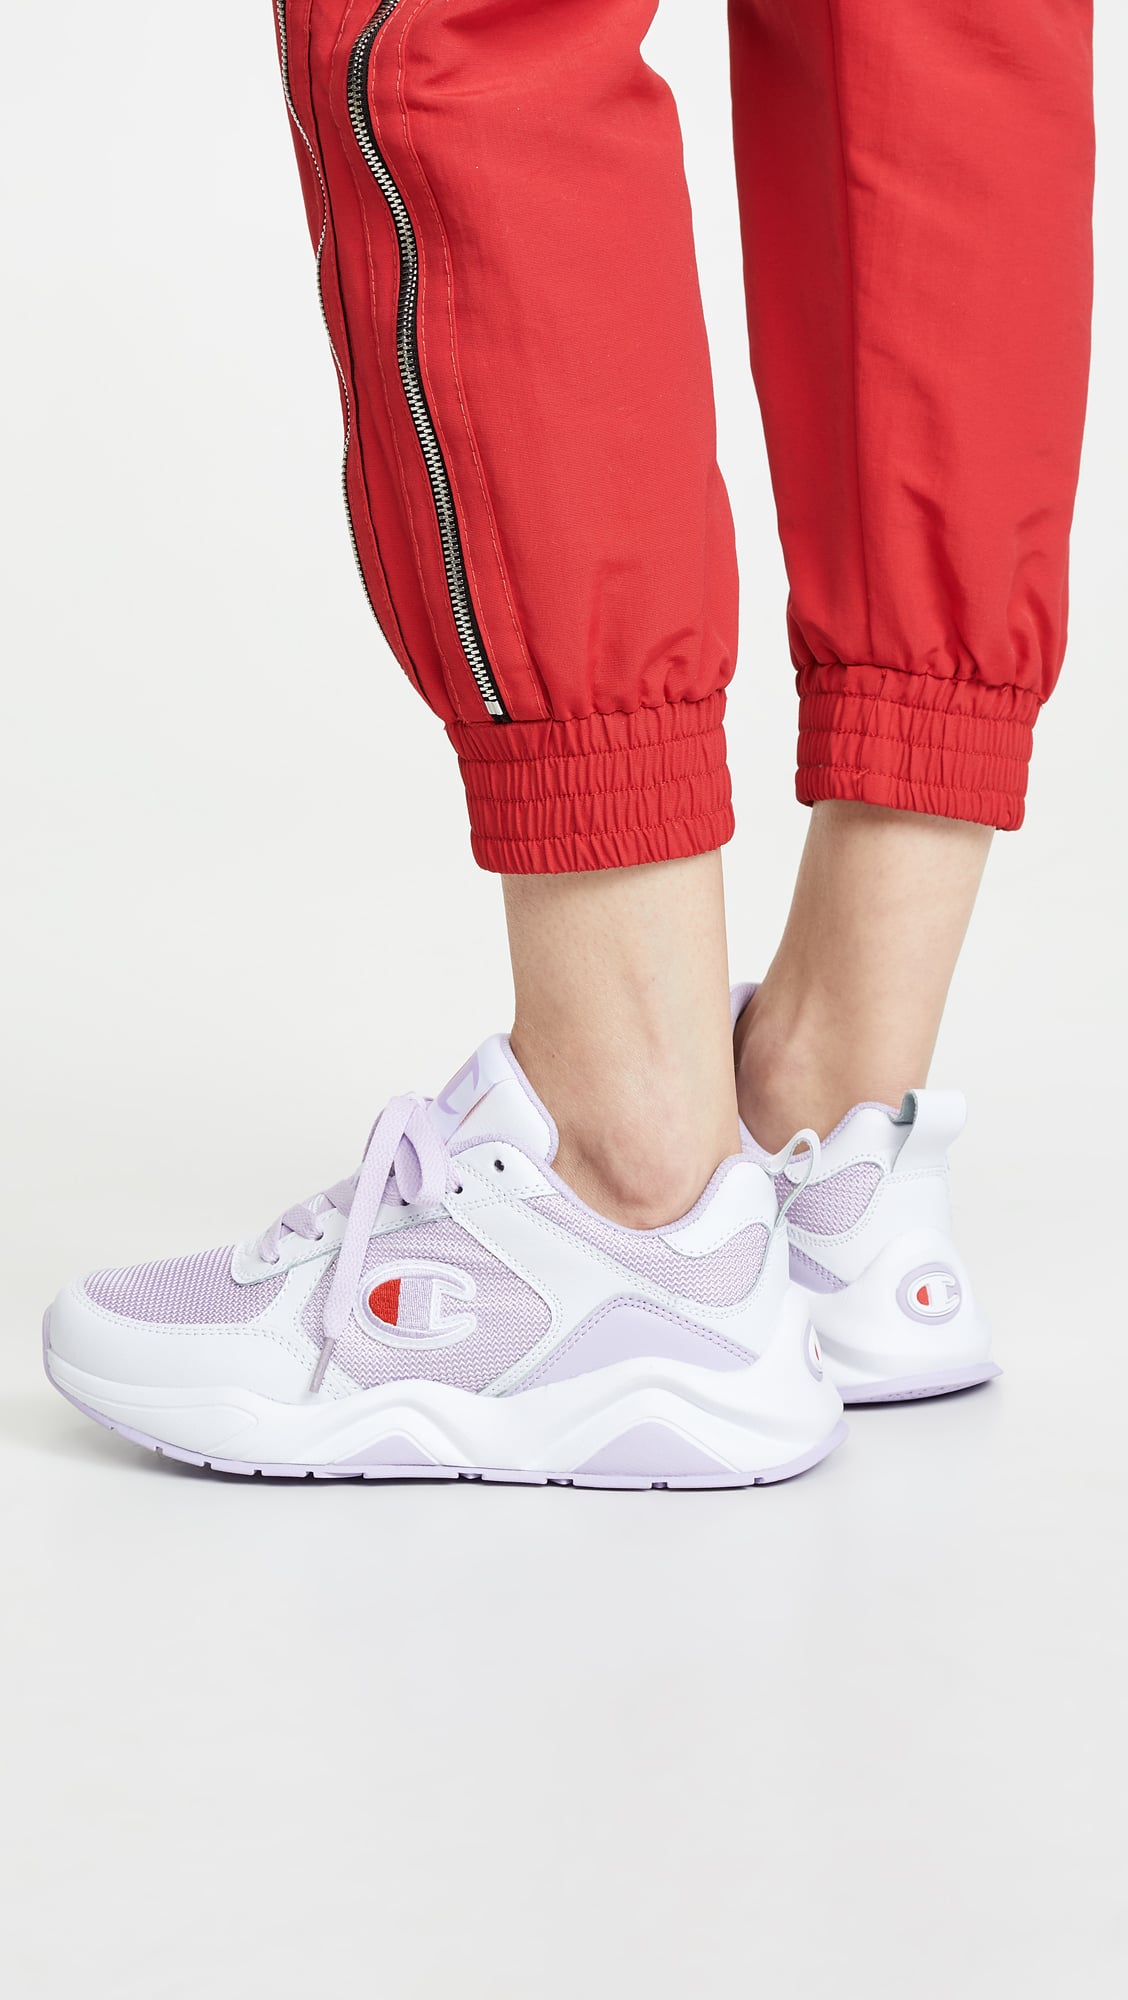 where can i buy champion sneakers